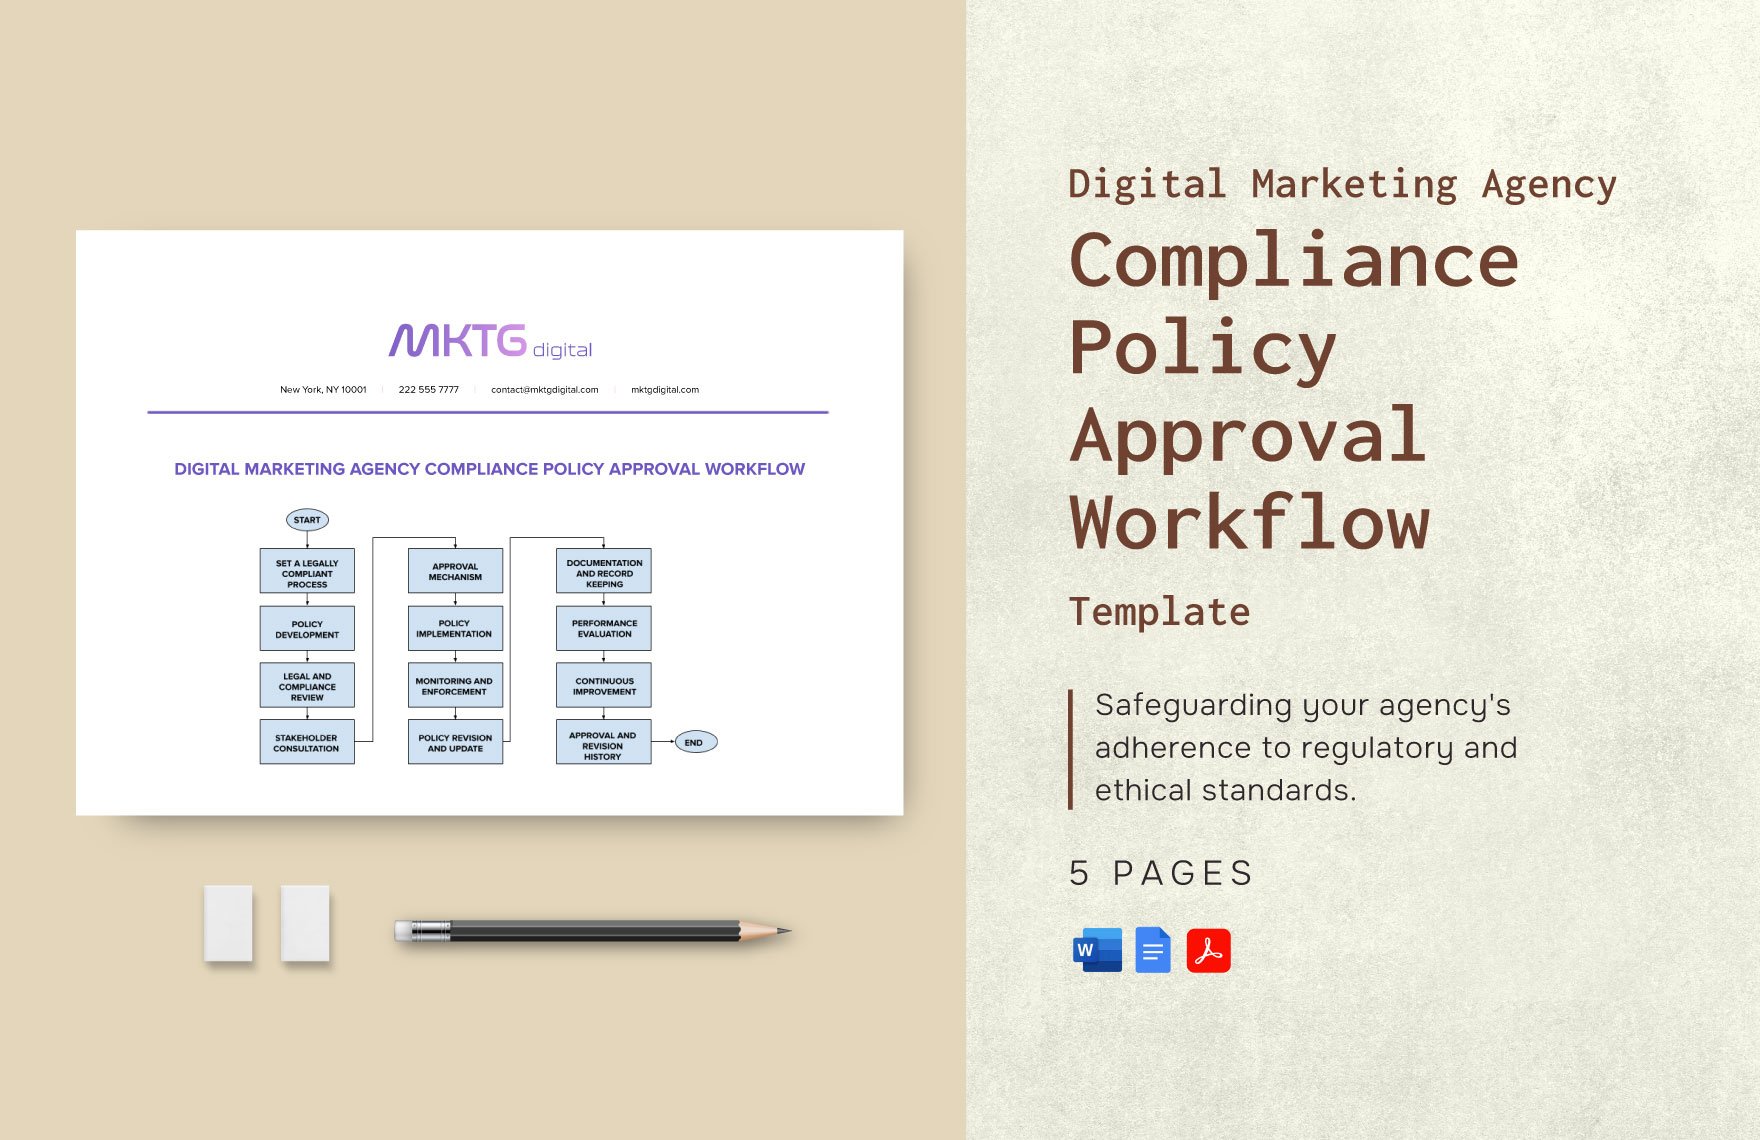 Digital Marketing Agency Compliance Policy Approval Workflow Template